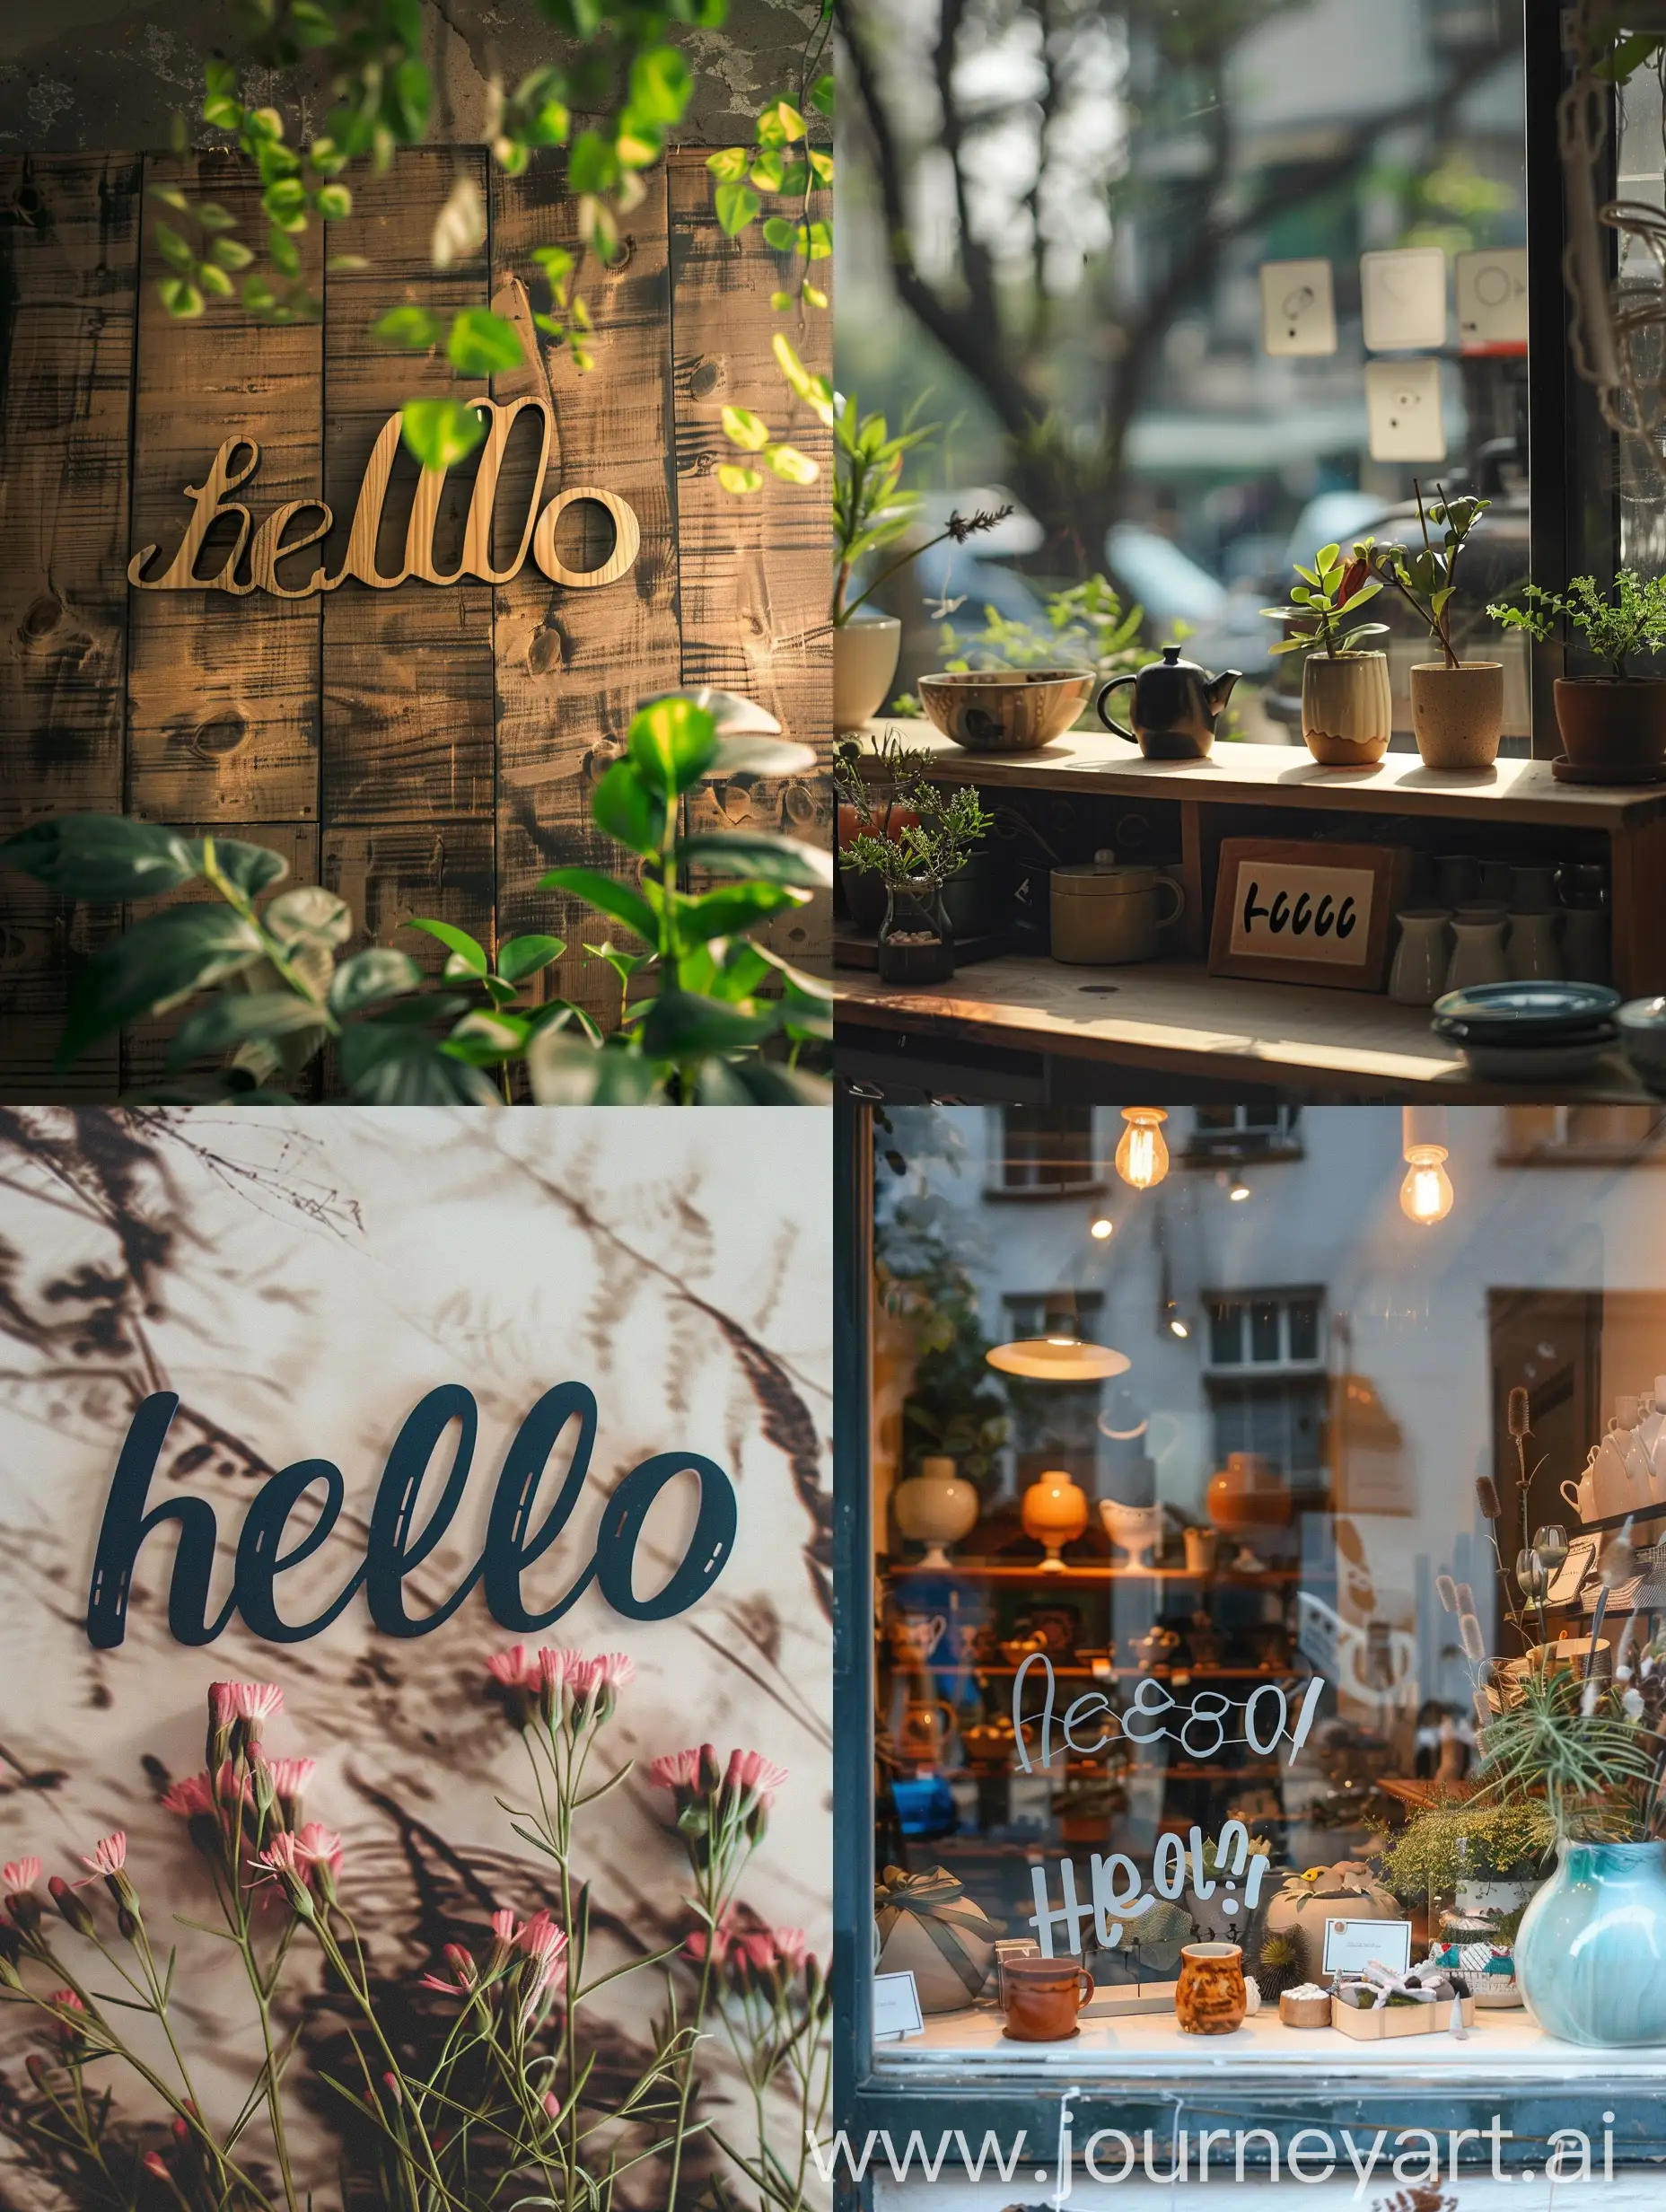 a shop with text "hello"